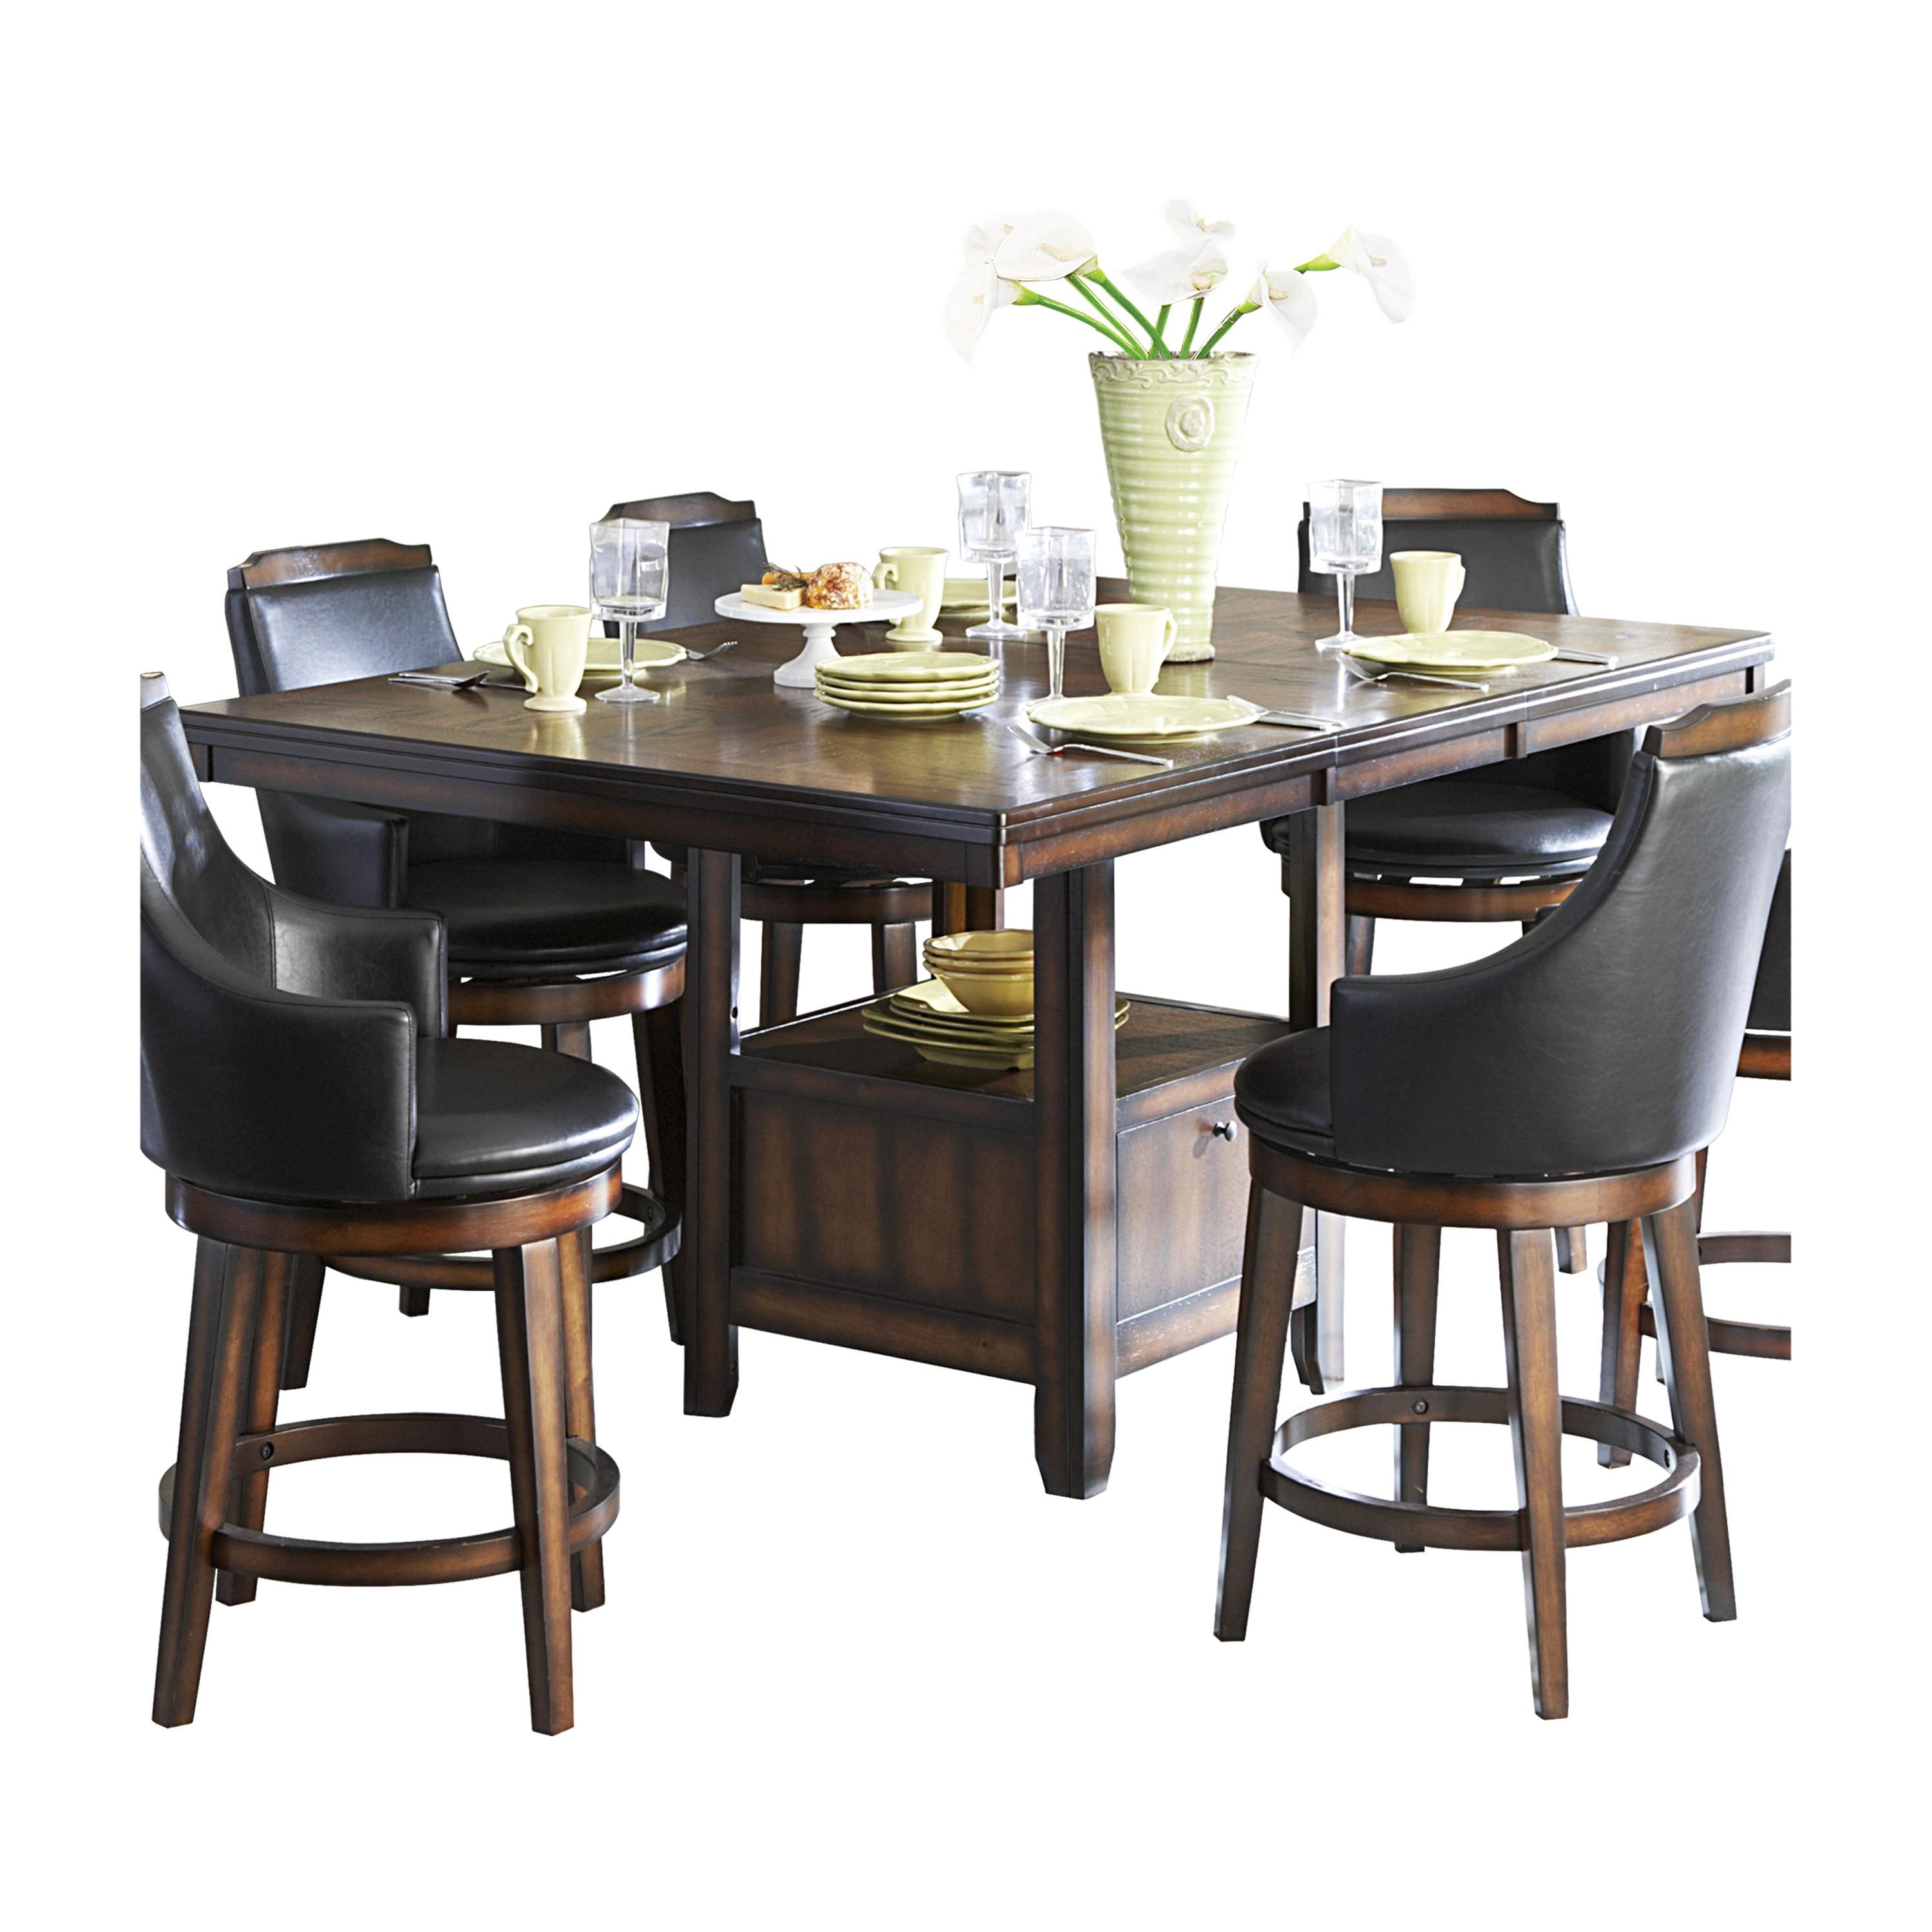 Transitional Dining Room Set 5447-36XL-5PC Bayshore 5447-36XL-5PC in Oak, Dark Brown Faux Leather